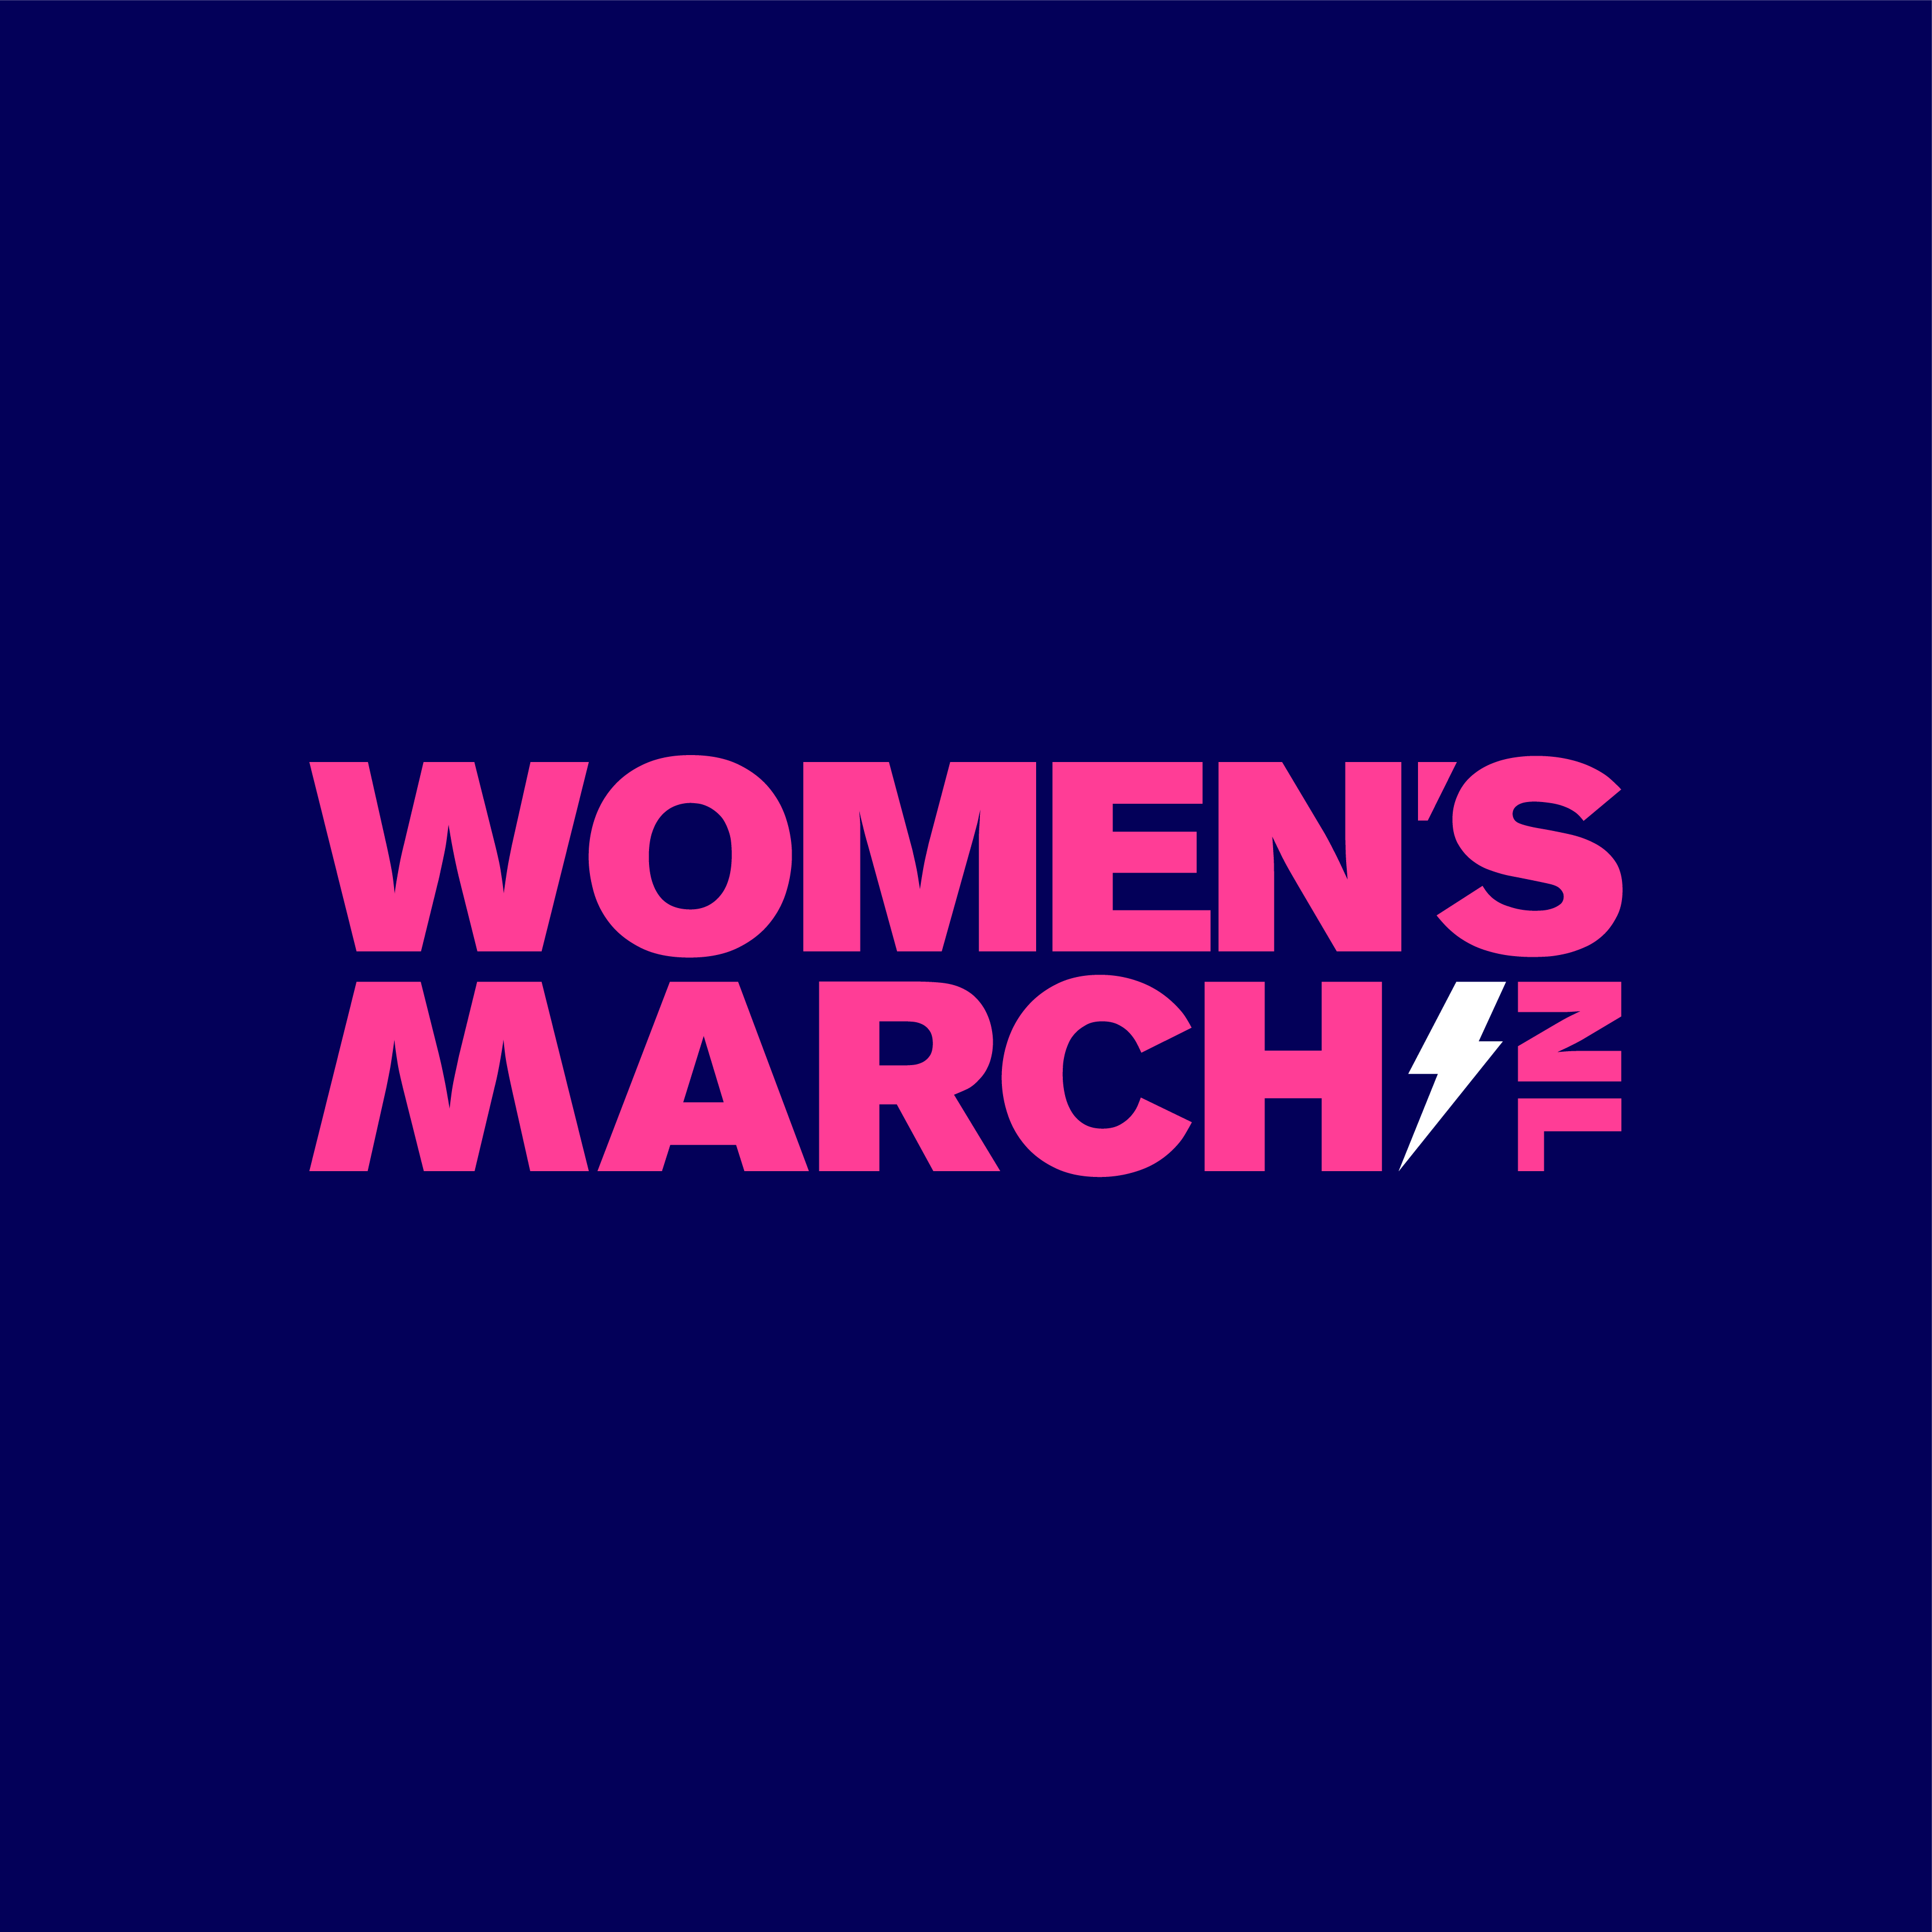 Steun de Feminist March | Women’s March Nederland (Powered by Donorbox)